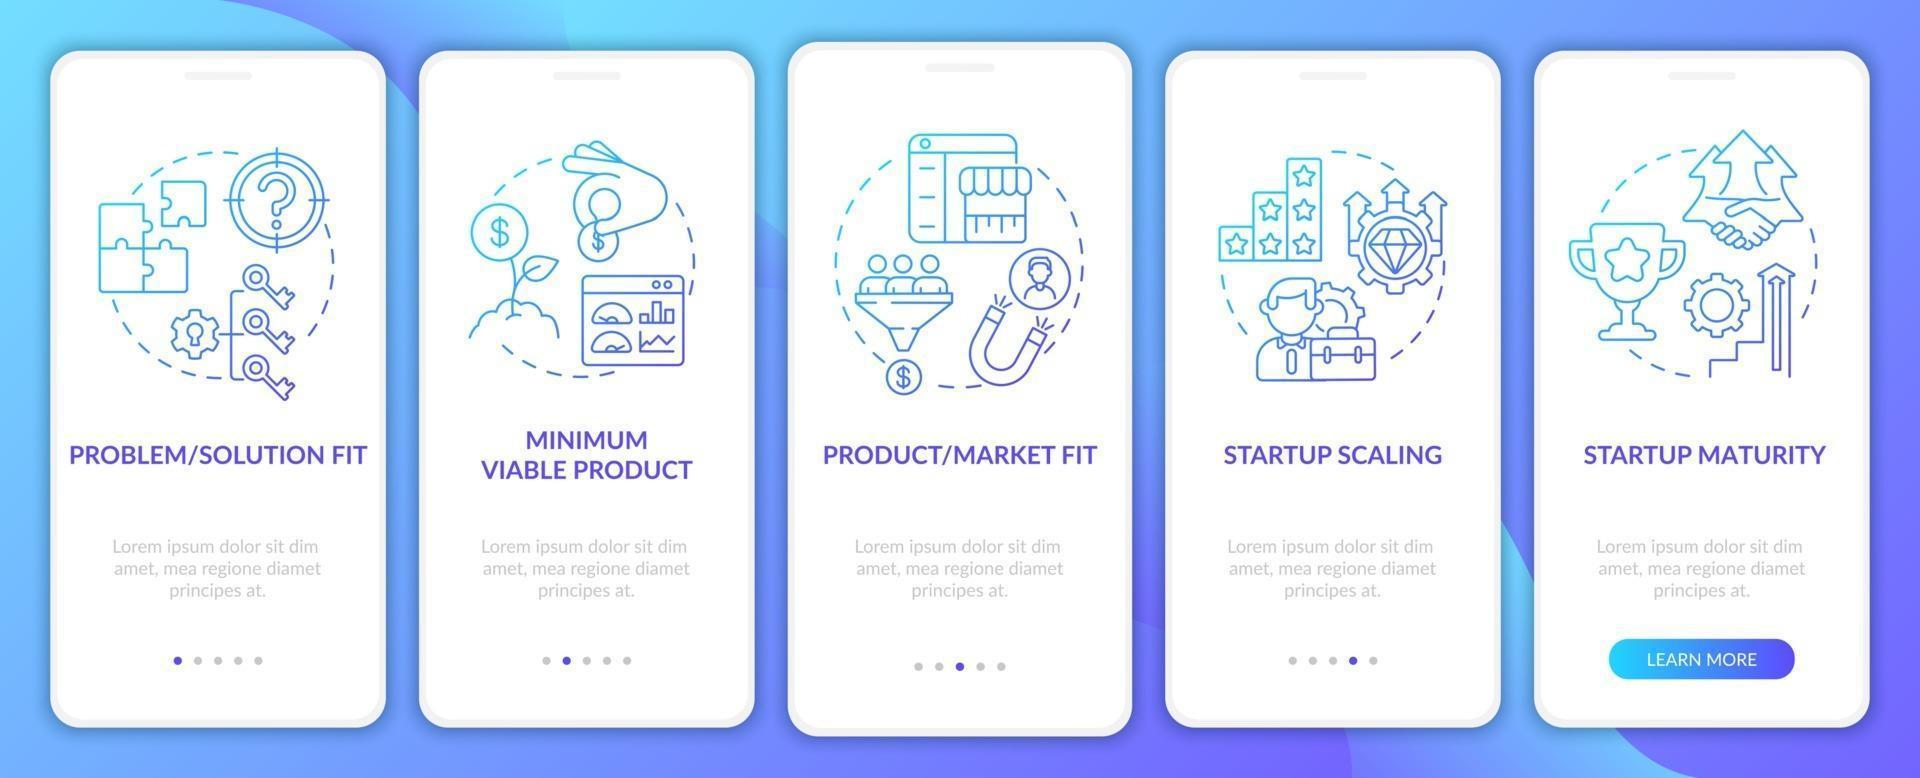 Startup lifecycle phases gradient onboarding mobile app page screen vector